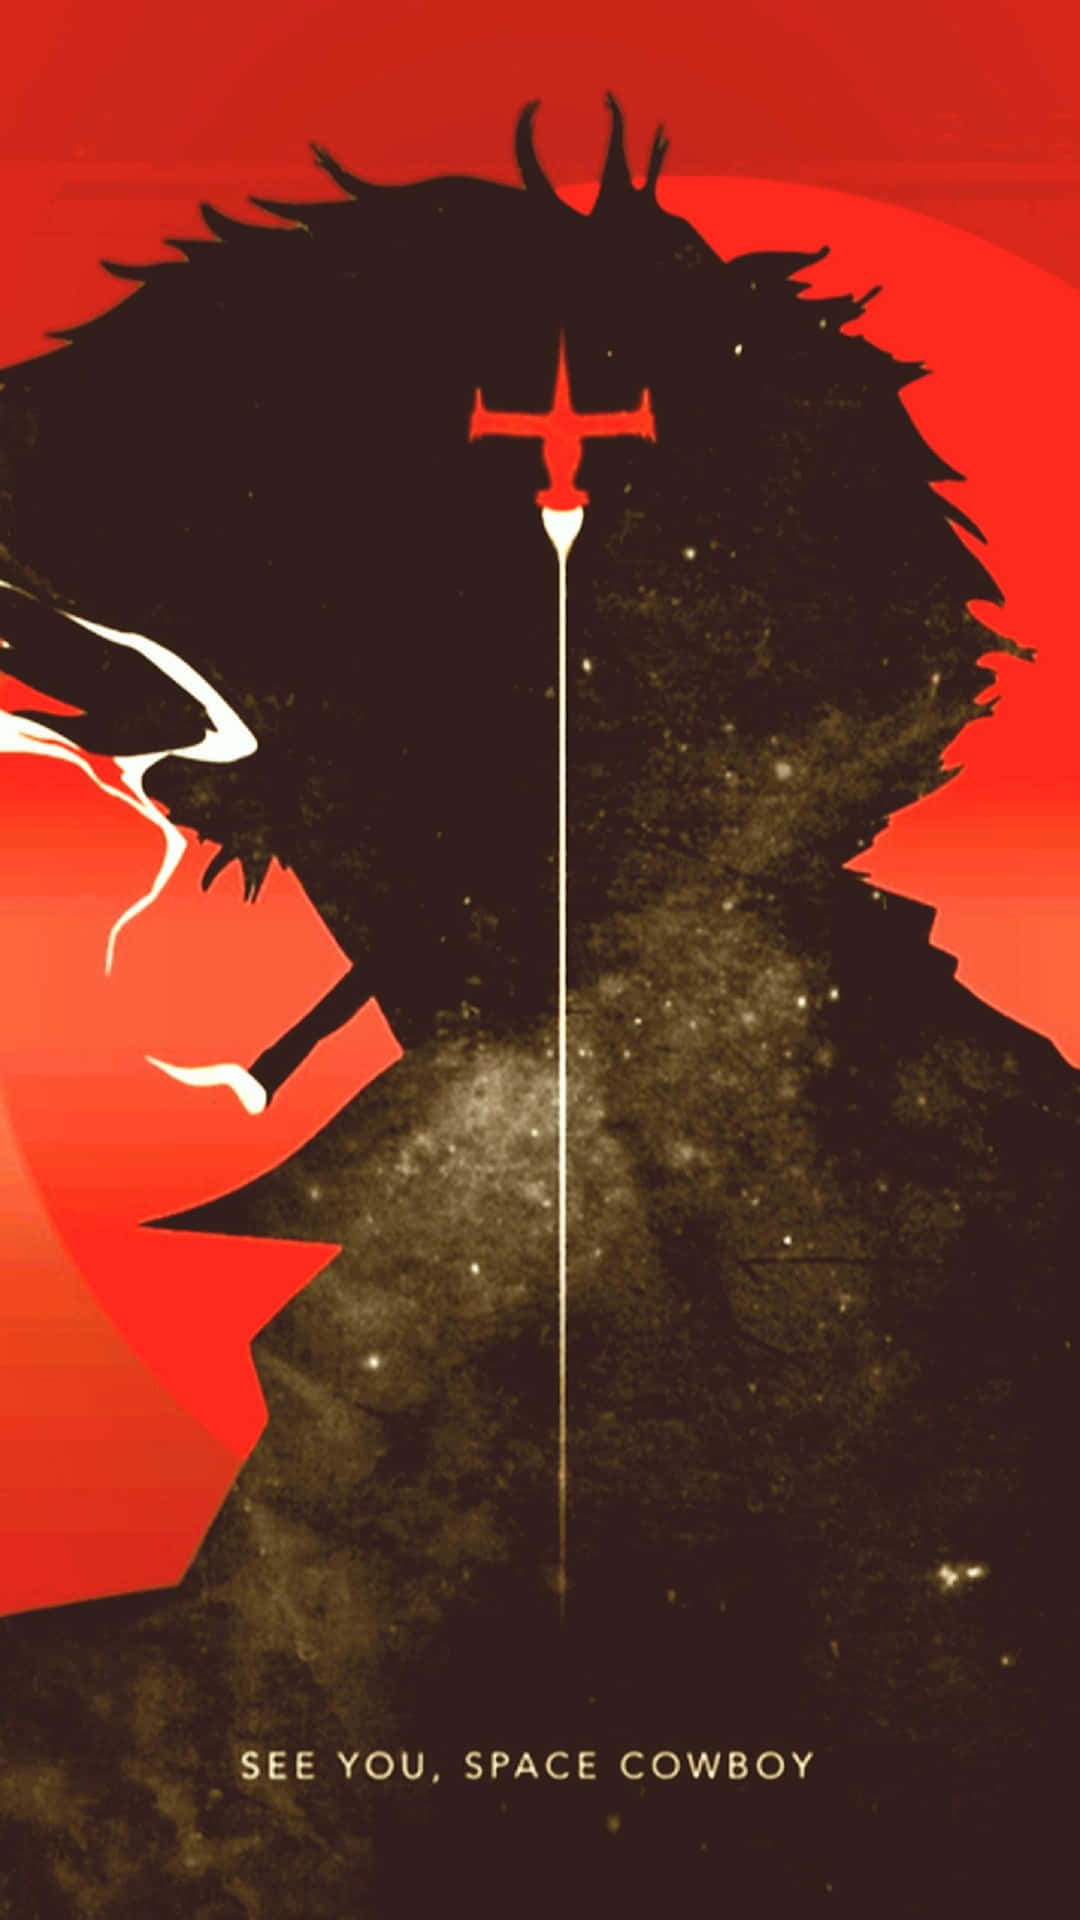 Follow Your Dreams with Storytelling Series: Cowboy Bebop iPhone Wallpaper